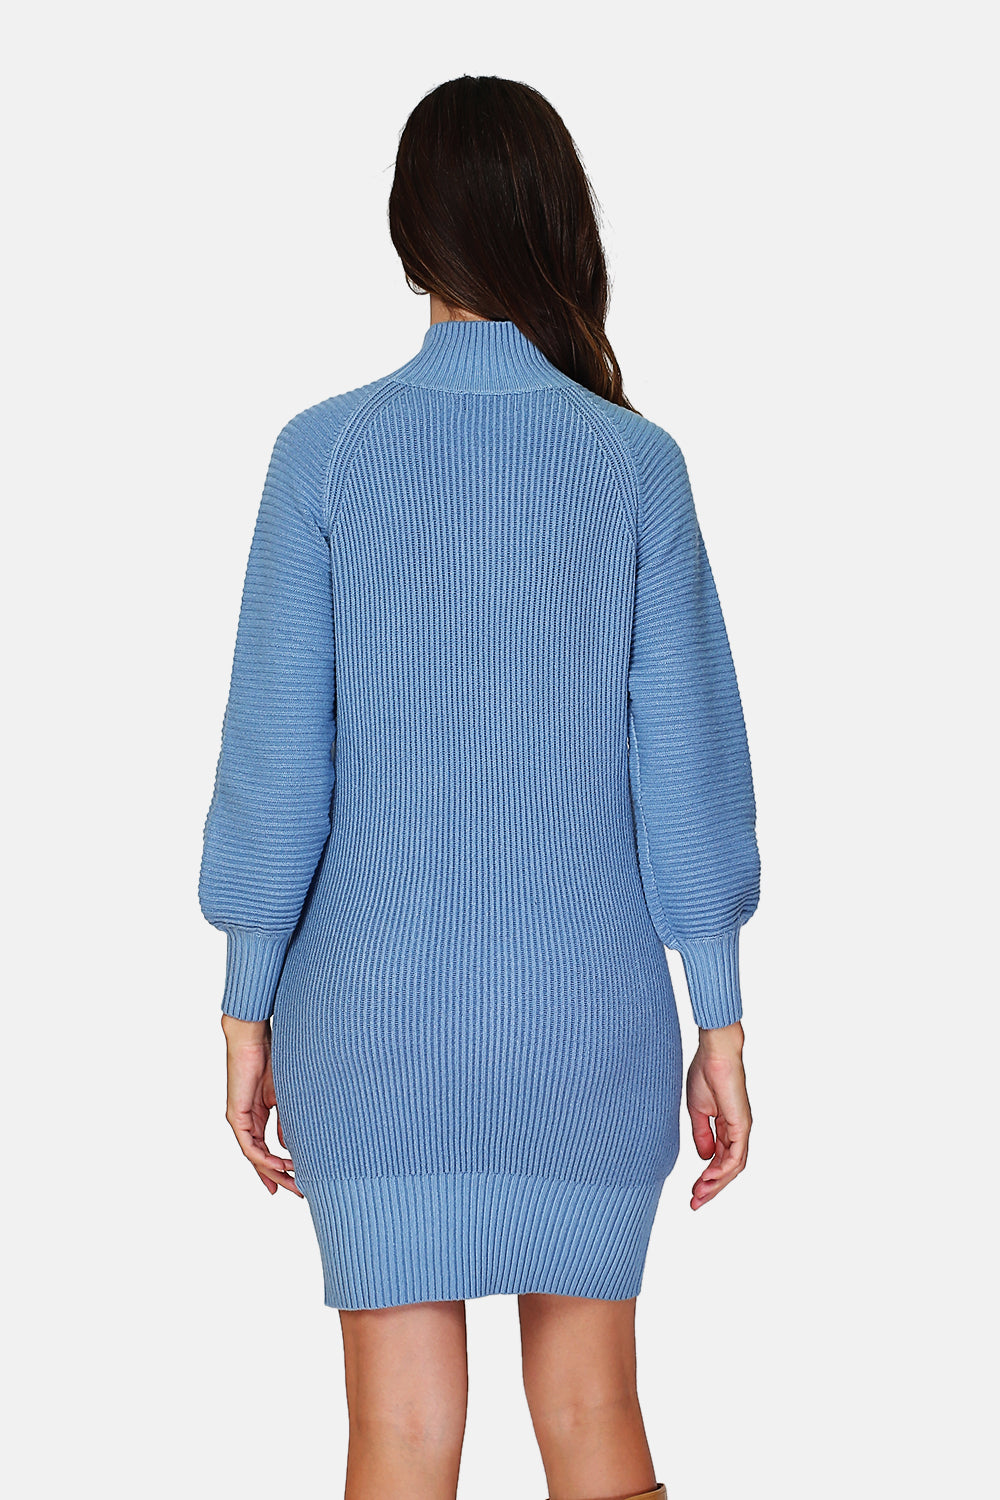 Fancy knit high neck dress with slightly puffed long sleeves